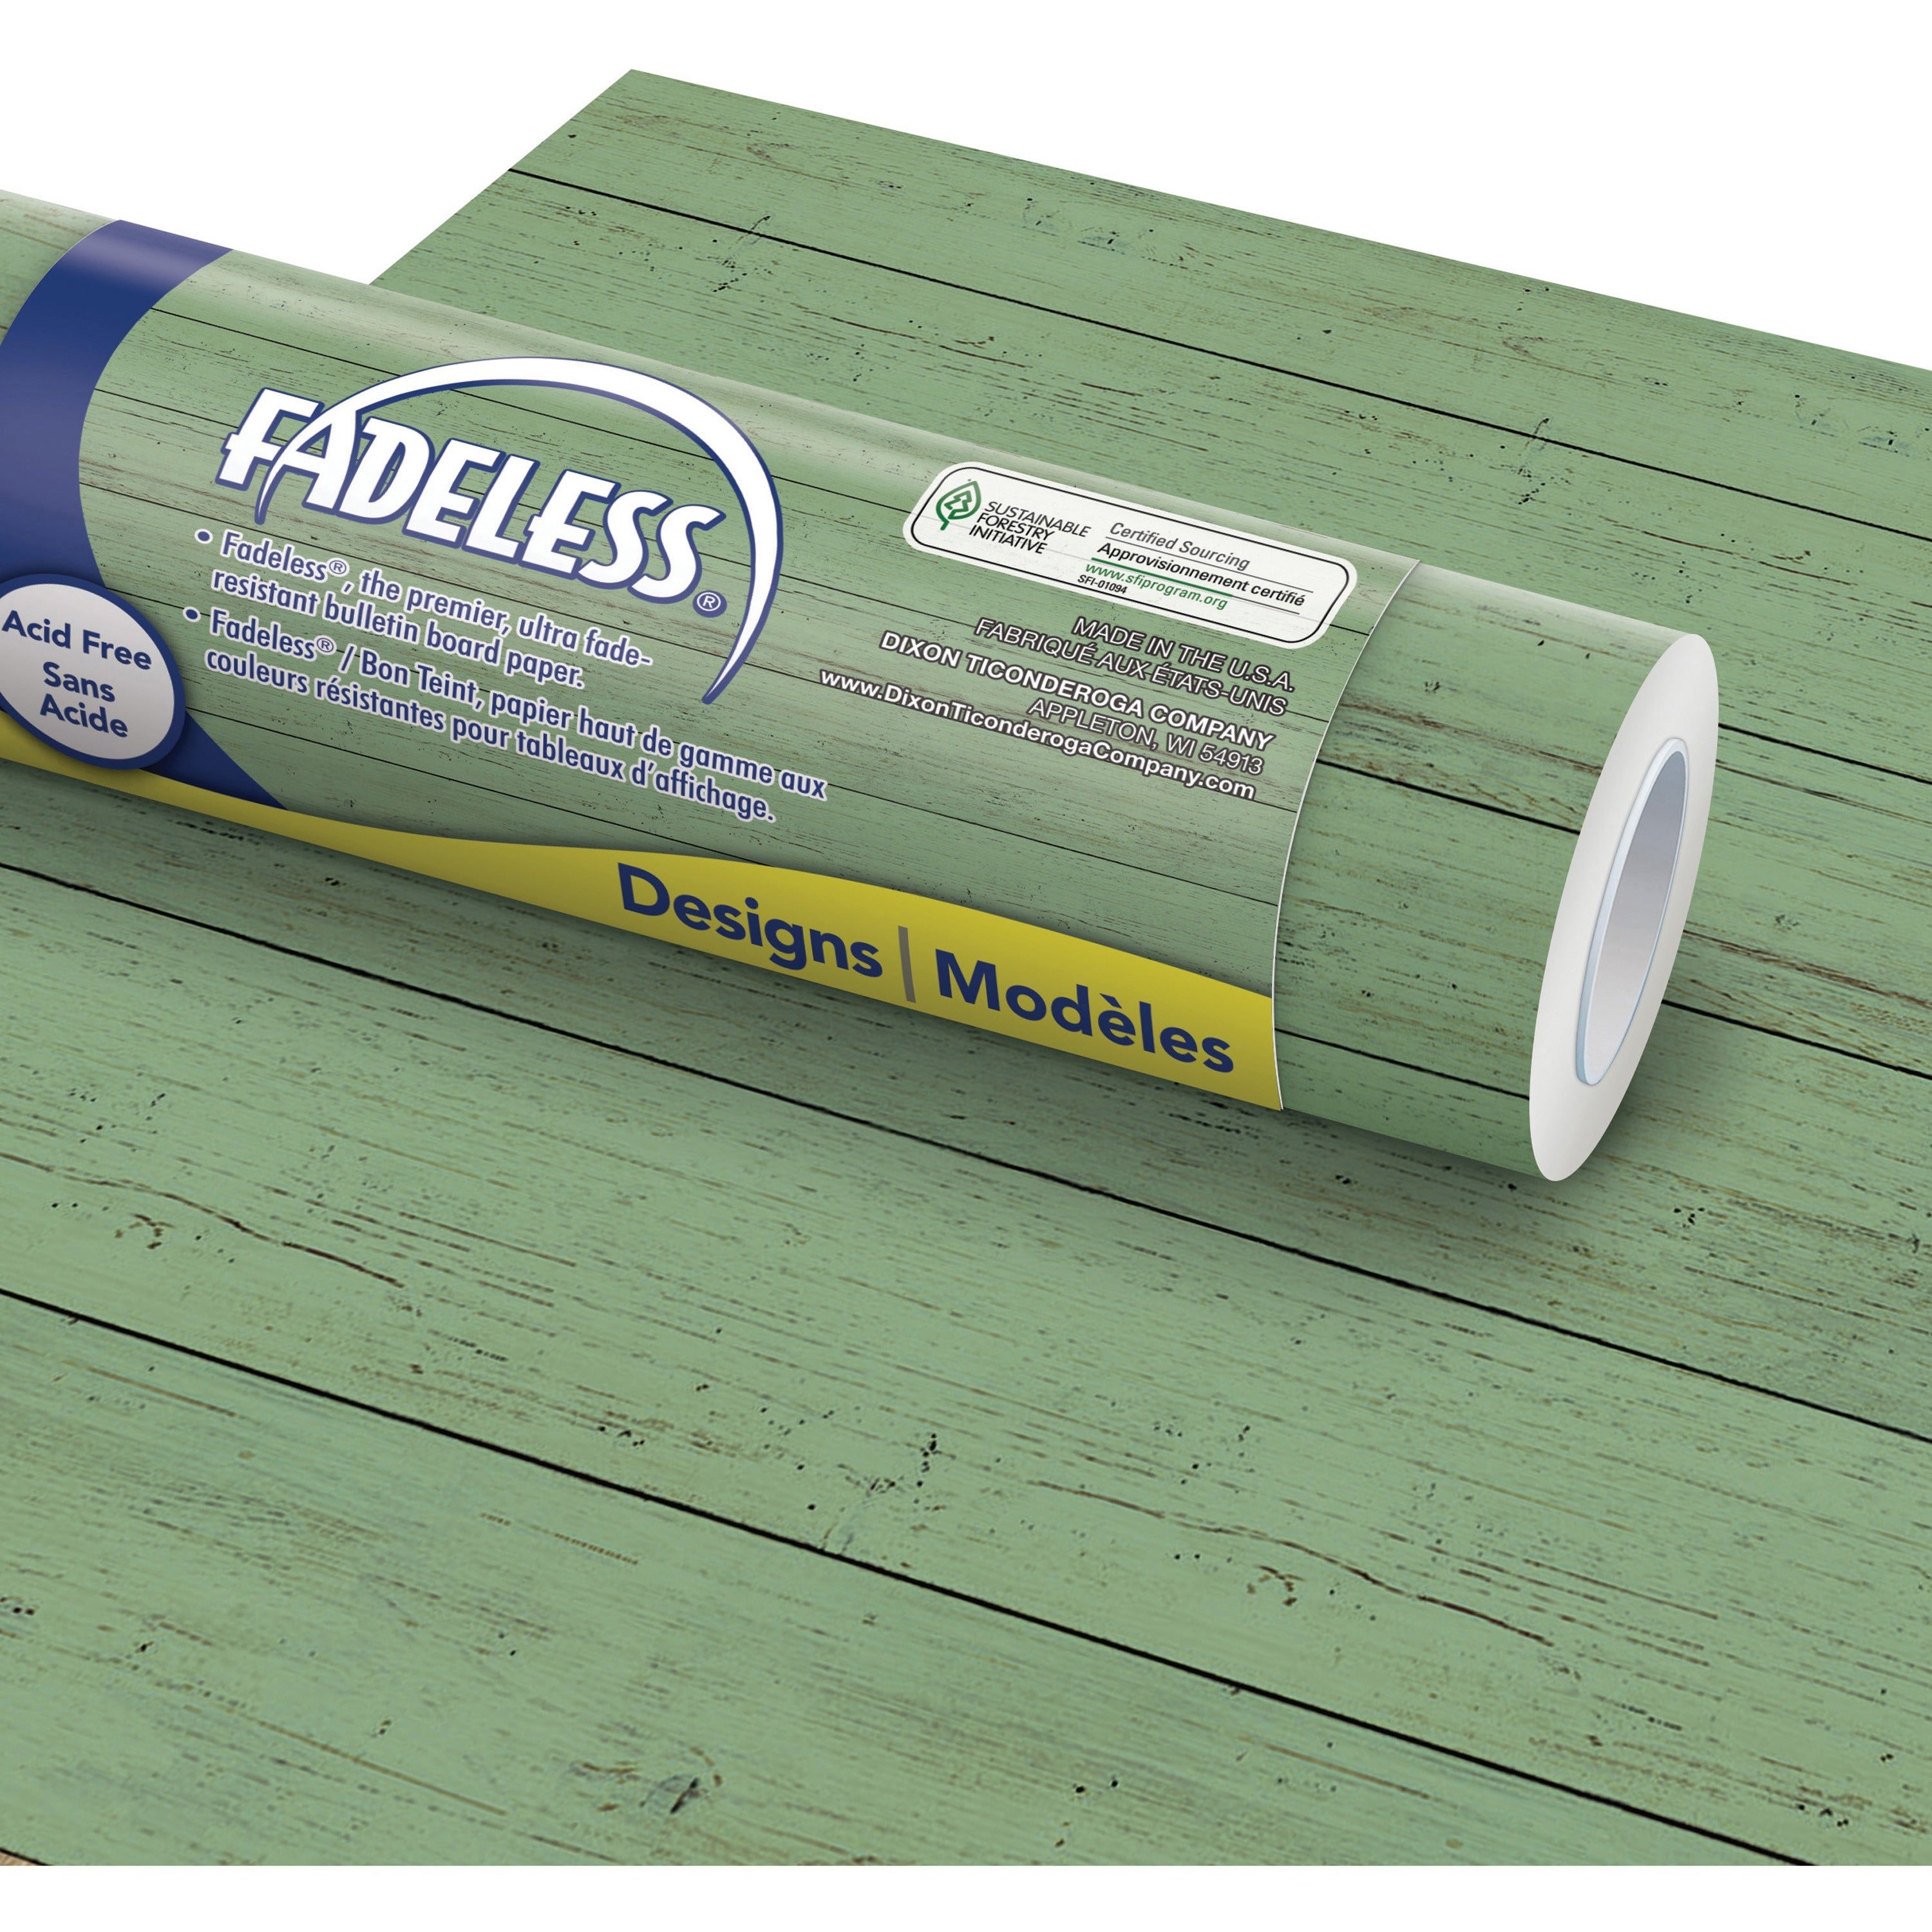 fadeless-bulletin-board-paper-rolls-bulletin-board-classroom-fun-and-learning-file-cabinet-door-display-paper-sculpture-table-skirting-party-home-project-office-project--48width-x-50-ftlength-50-lb-basis-weight-1-roll-mint-sh_pacp0057075 - 1